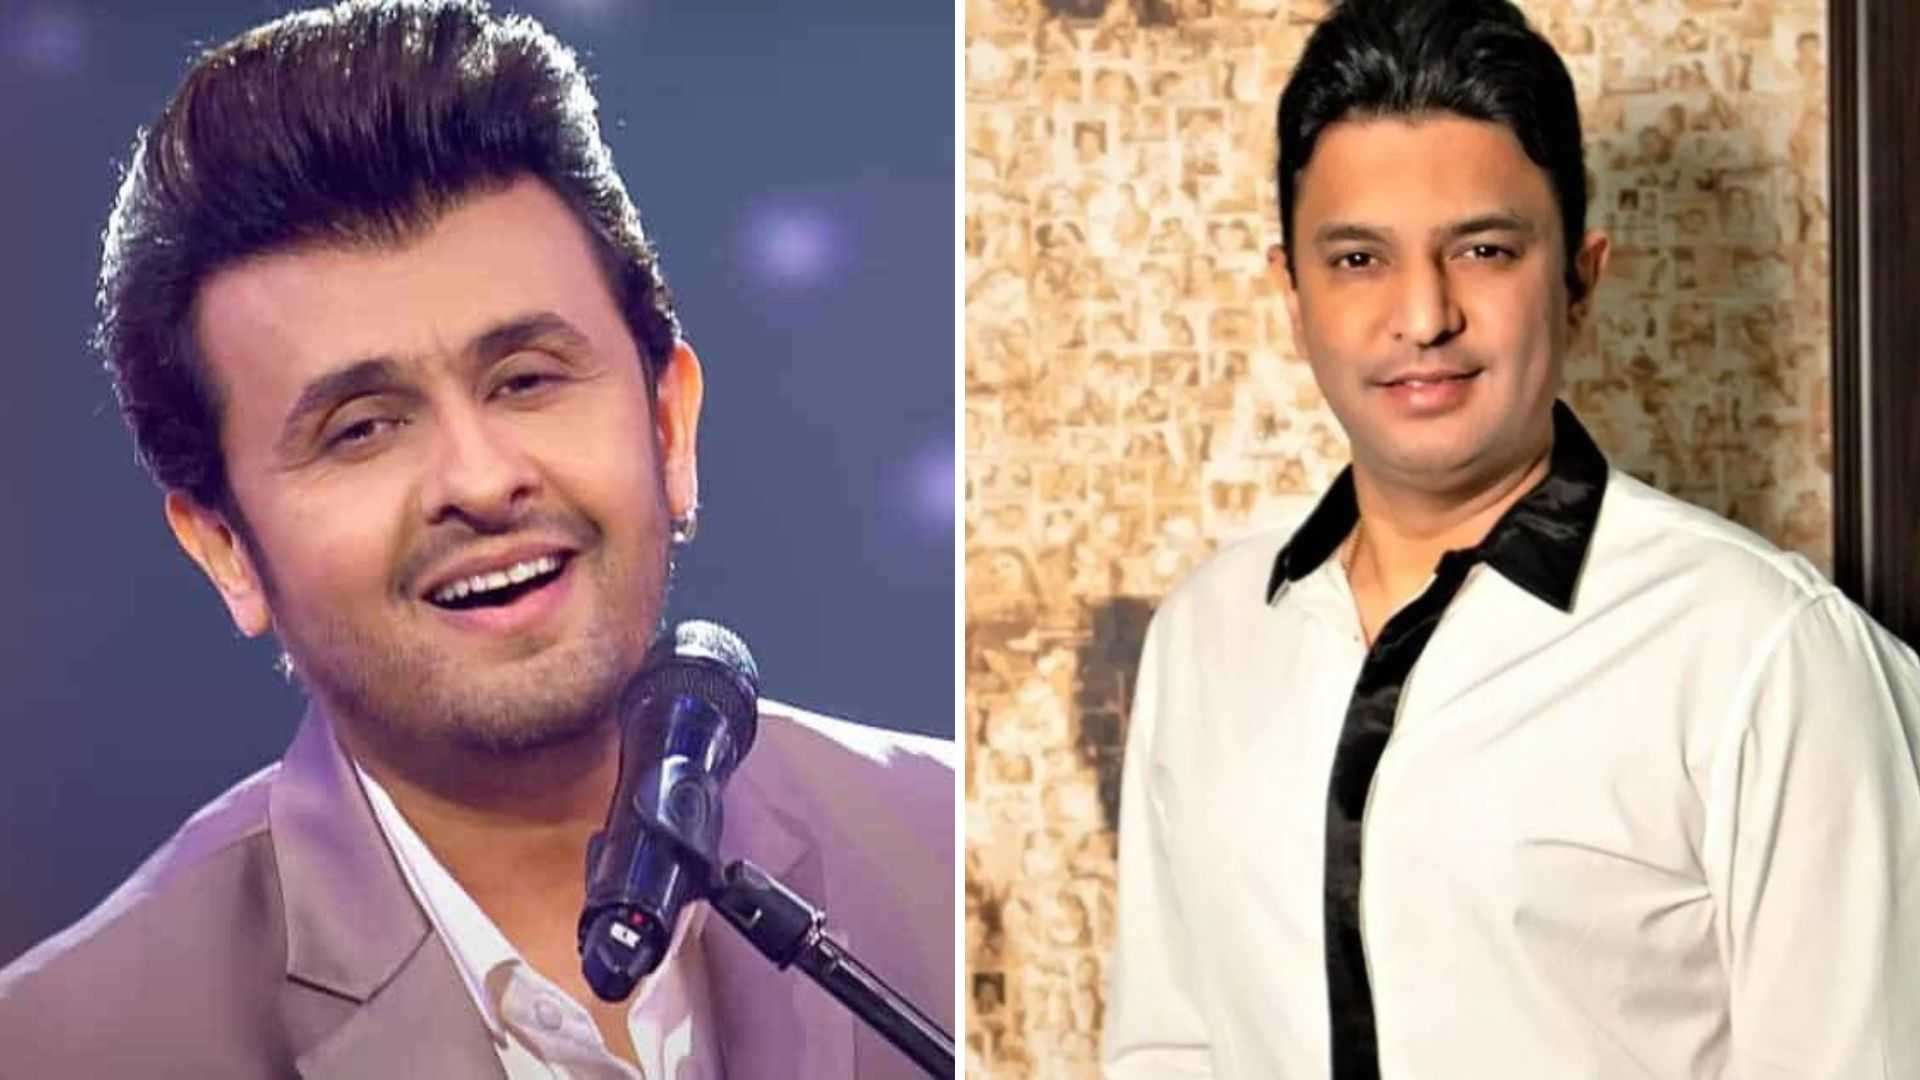 'Let’s not make a big deal out of it': Sonu Nigam on reconciliation with Bhushan Kumar after a three-year feud